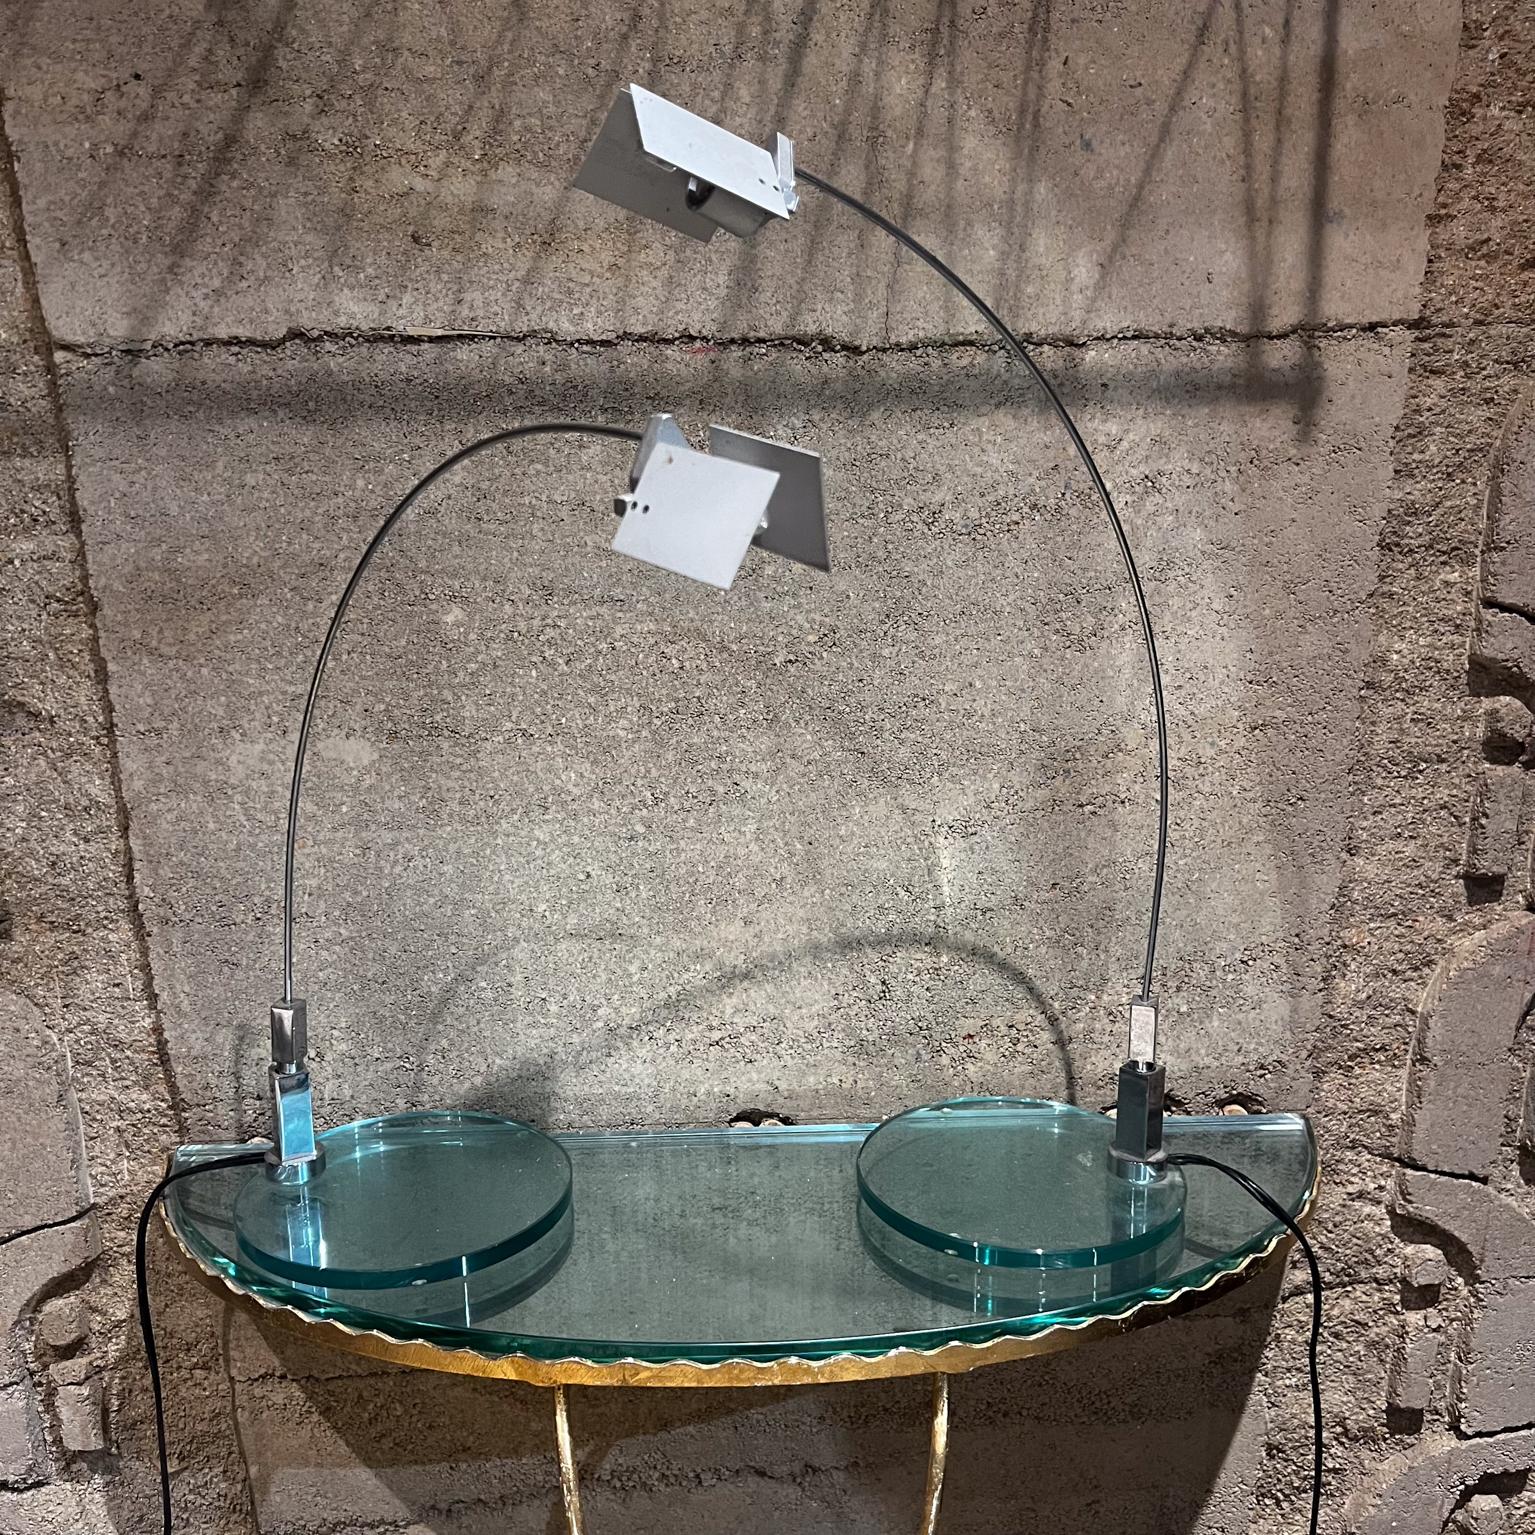 1990s Magnificent pair of modern table lamps by Fontana Arte designed by Alvaro Siza Italy
circa 1994.
Adjustable body to manage light.
Chrome metal and glass.
Low-voltage table lamp electronic plug-in transformer cable switch for dual light